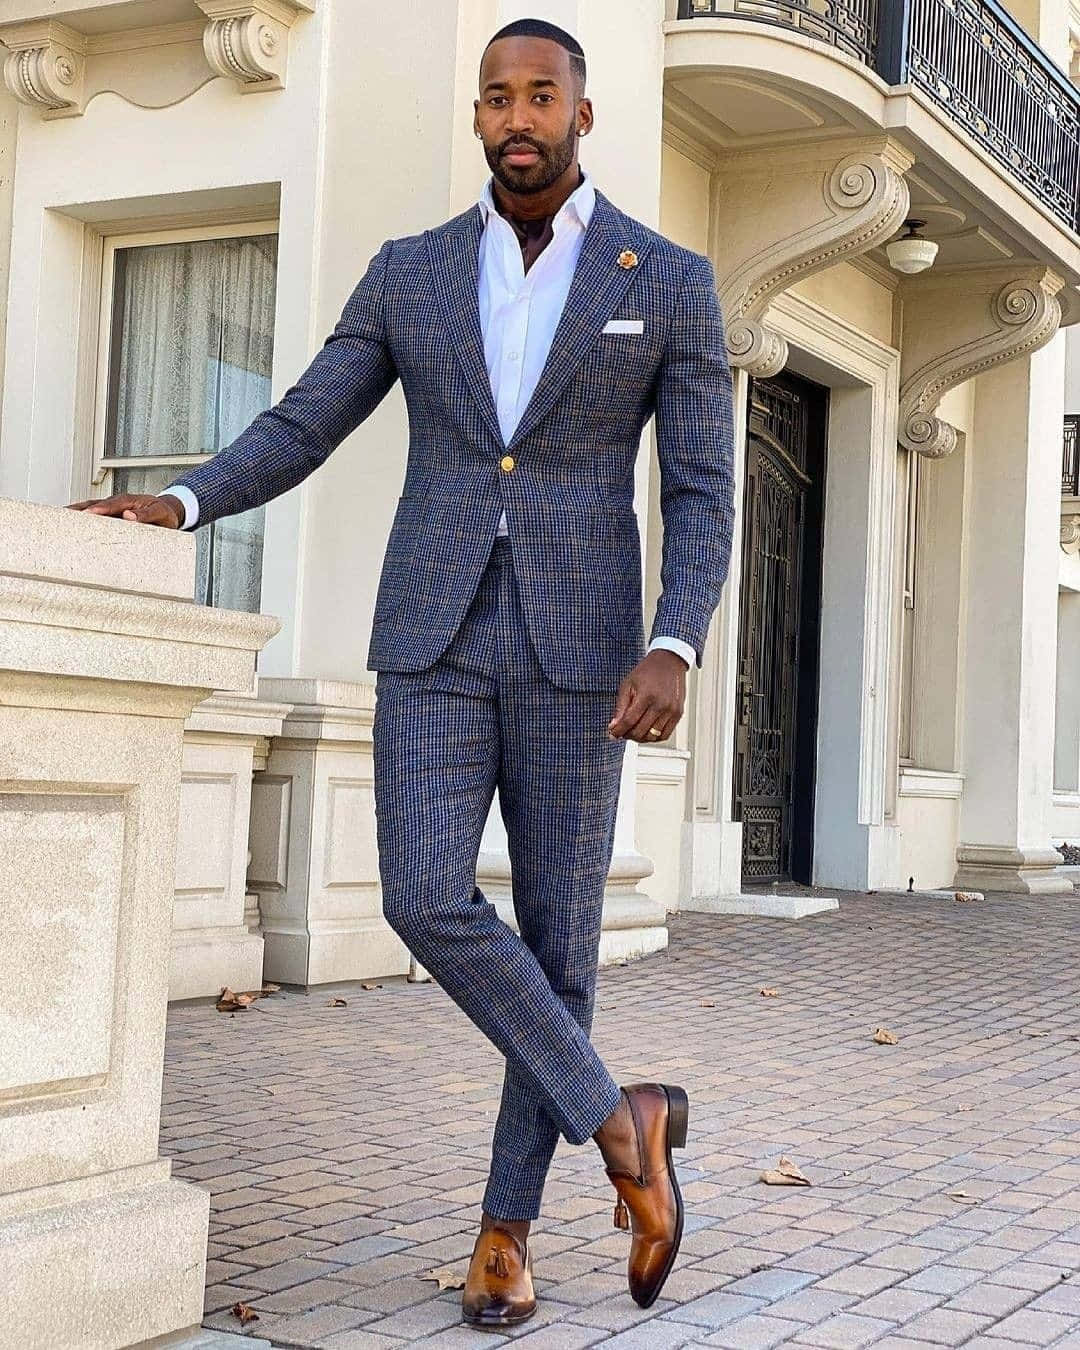 Make a statement with fashion in this modern suit